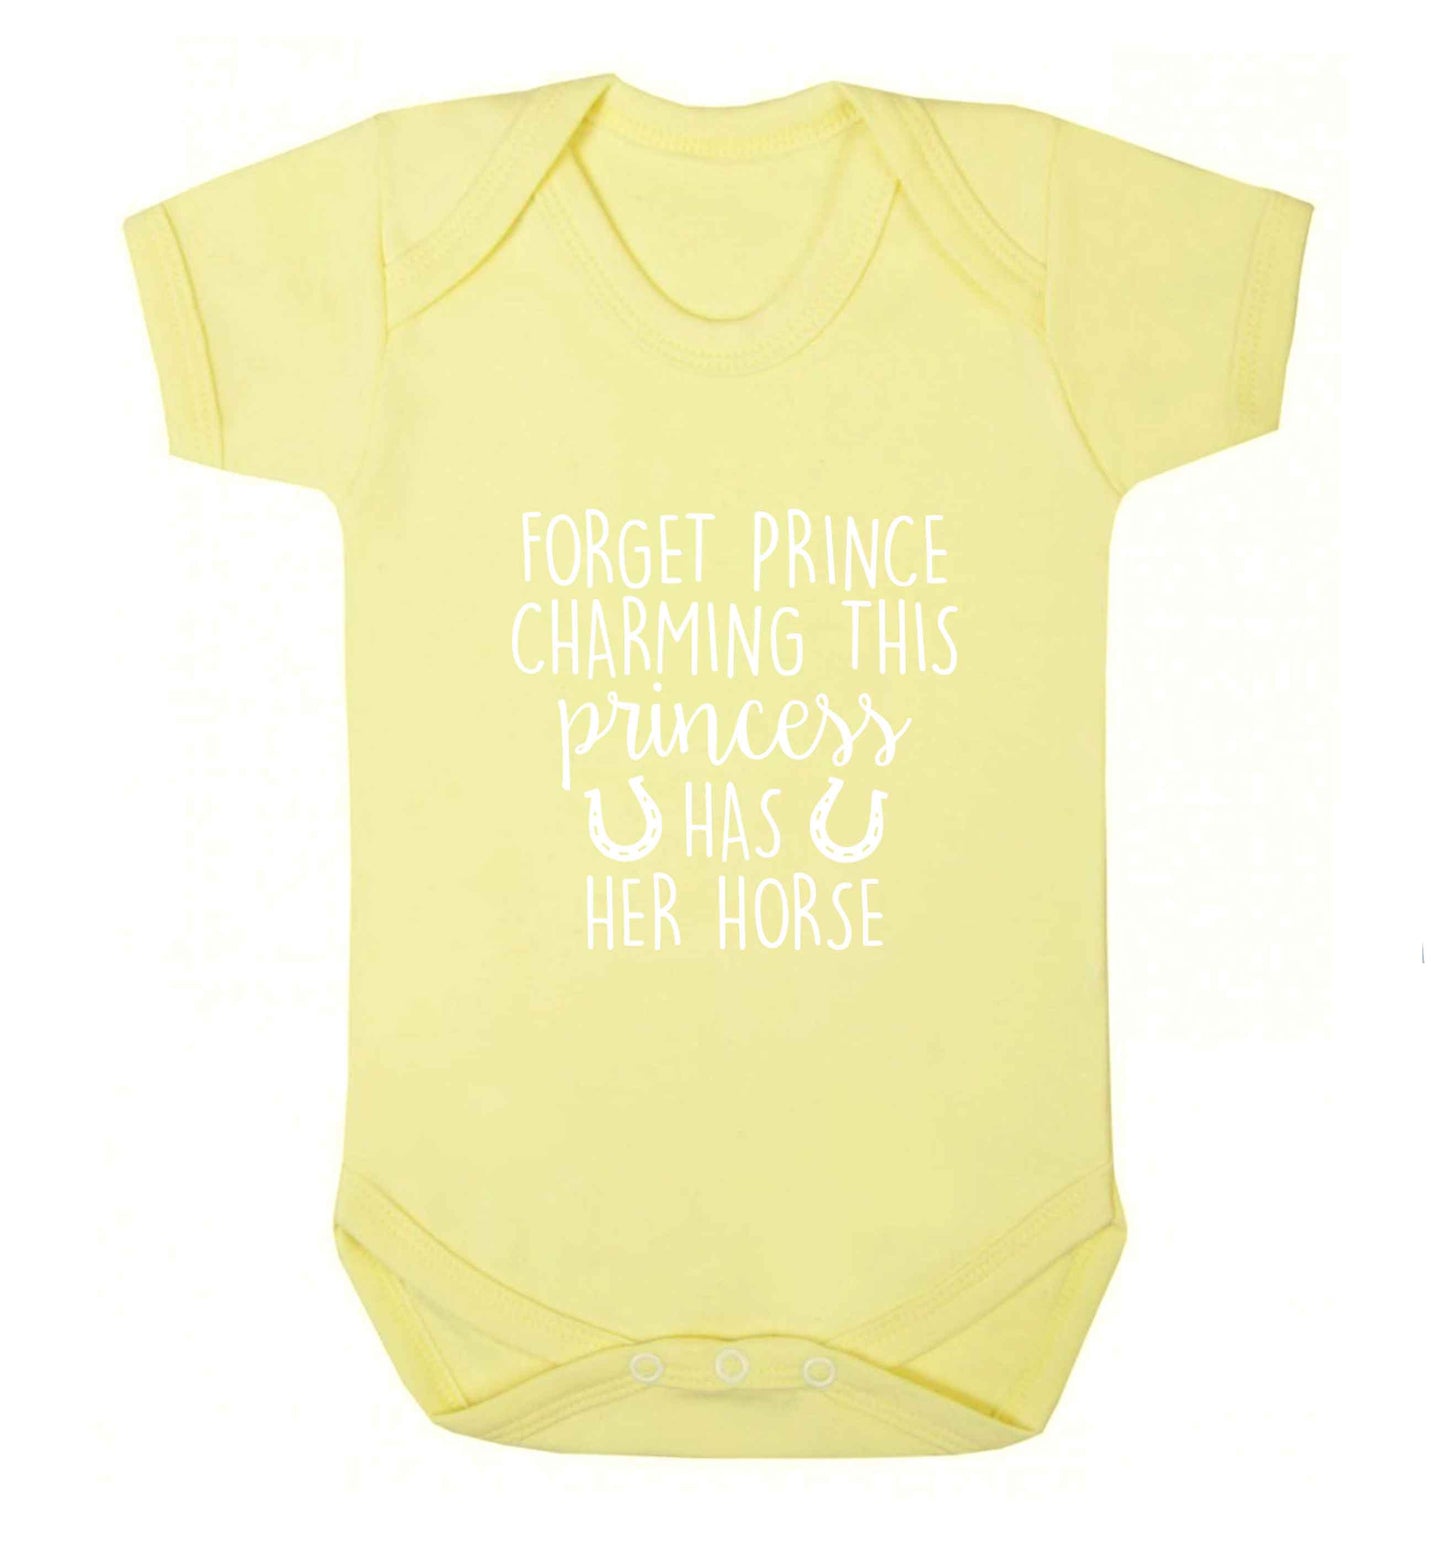 Forget prince charming this princess has her horse baby vest pale yellow 18-24 months